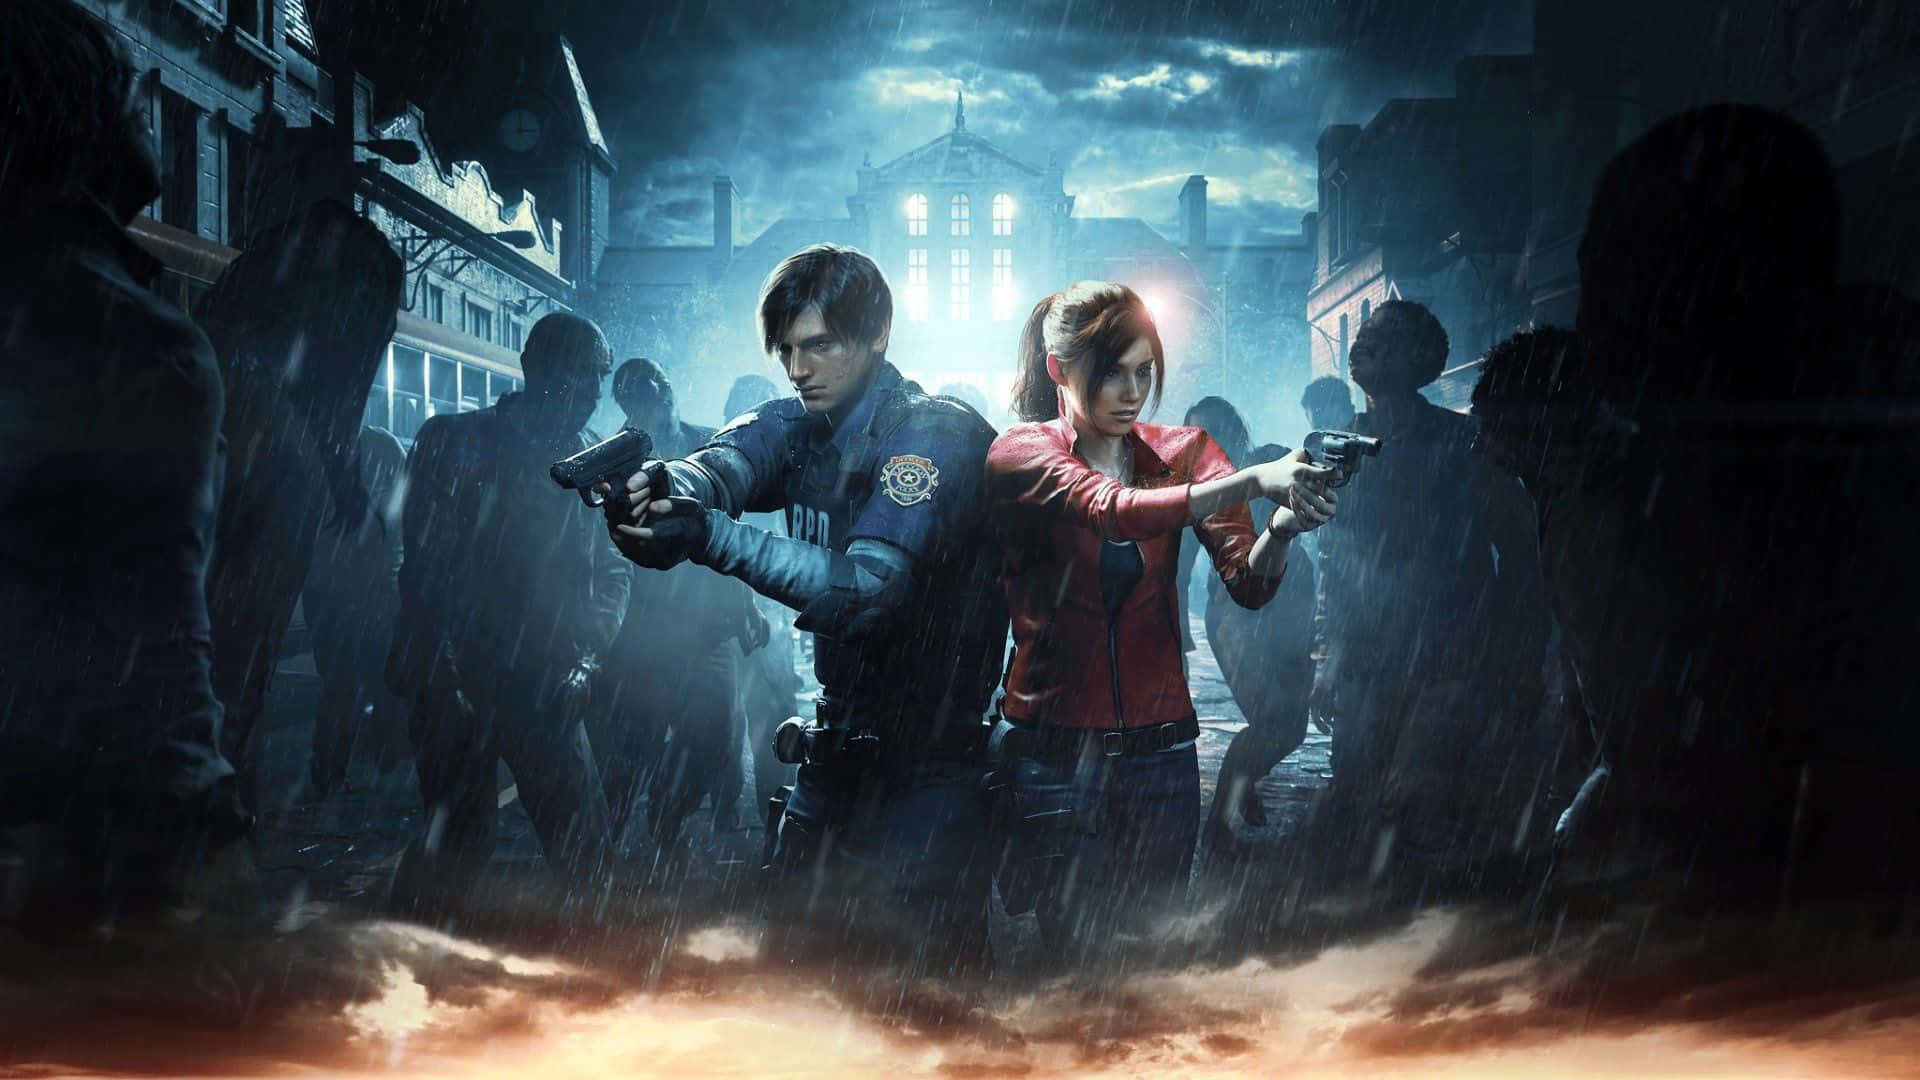 Leon And Claire In Resident Evil Wallpaper